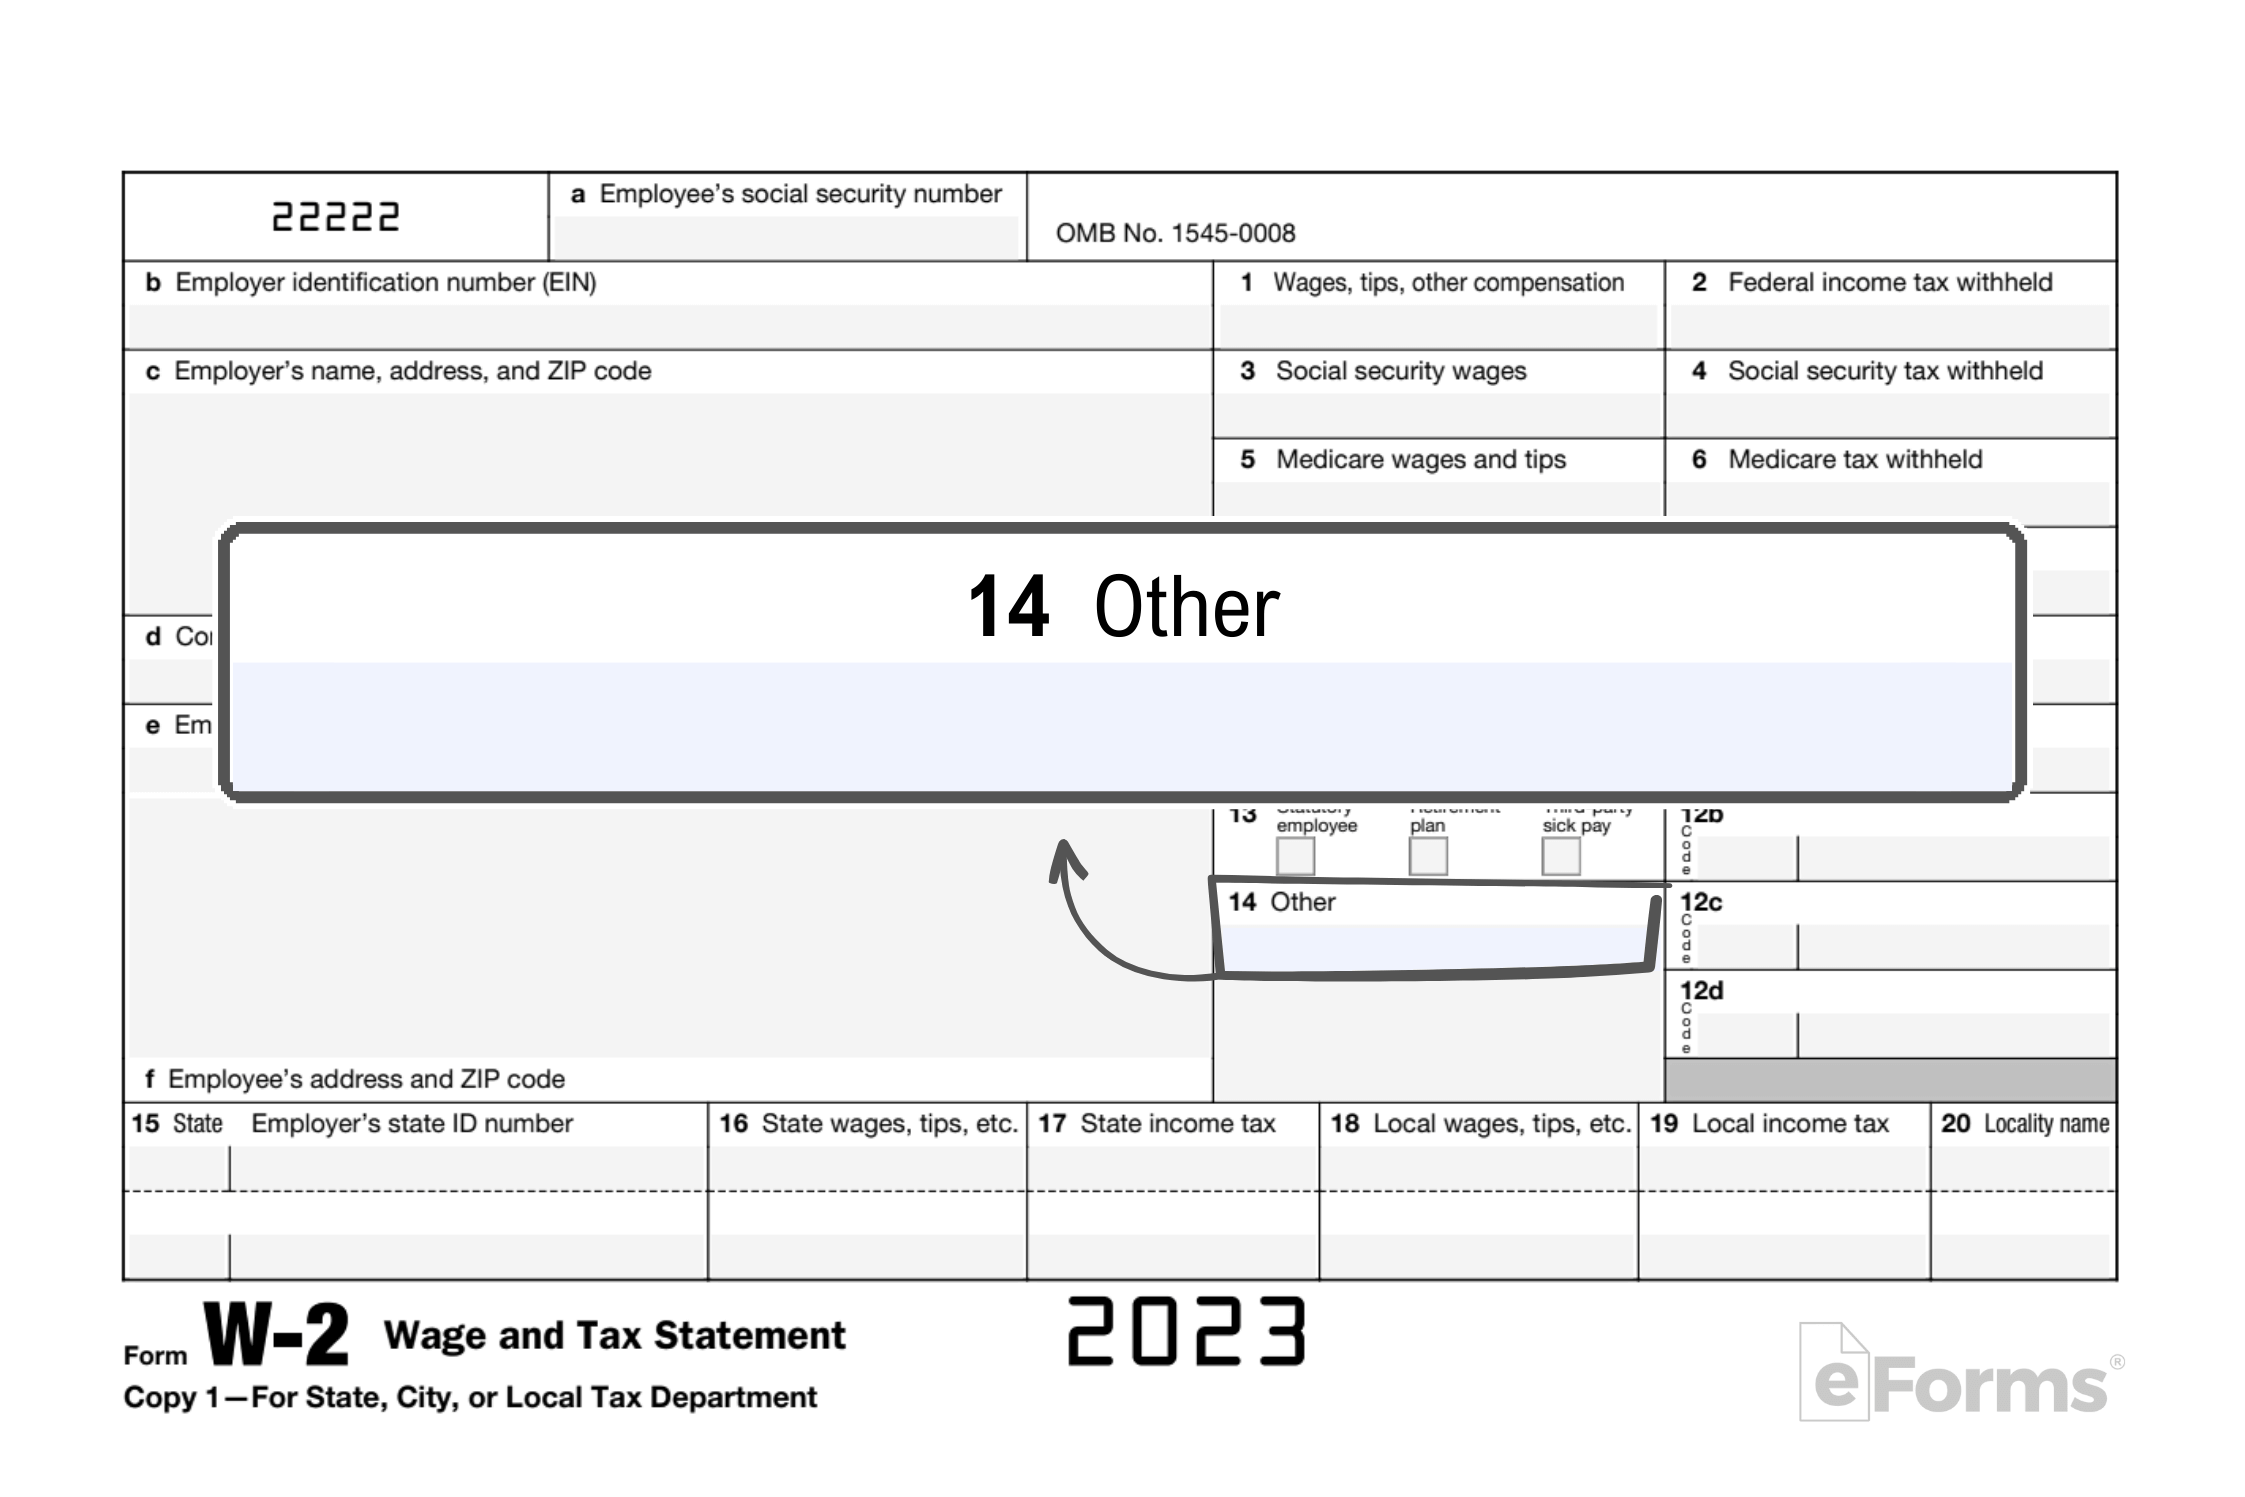 Free Irs Form W-2 | Wage And Tax Statement - Pdf – Eforms inside W2 Form Printable